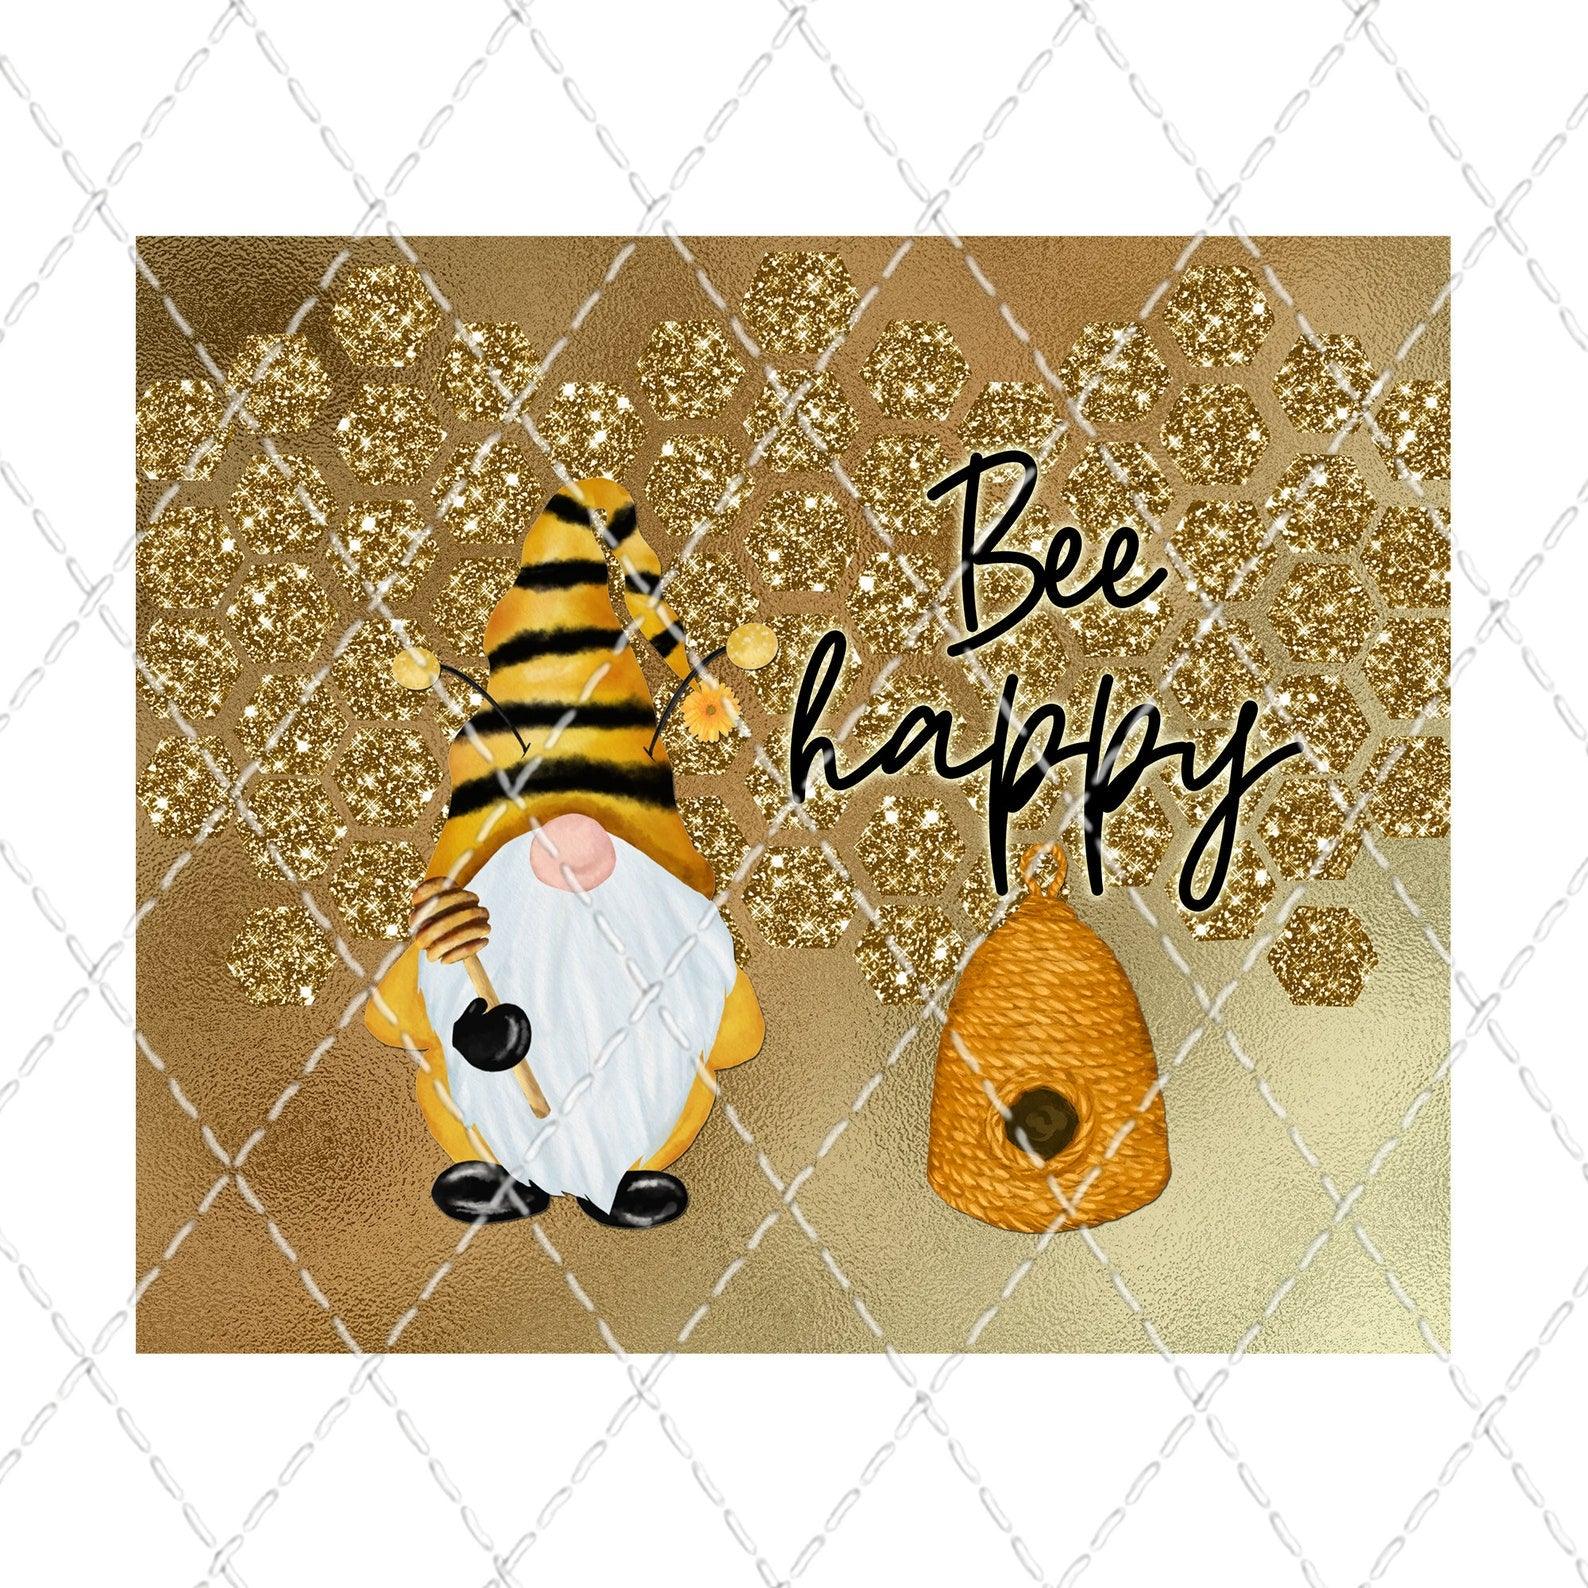 Bee Happy Gnome 30 oz. Straight Skinny Tumbler by SSC Designs - Scrapbook Supply Companies